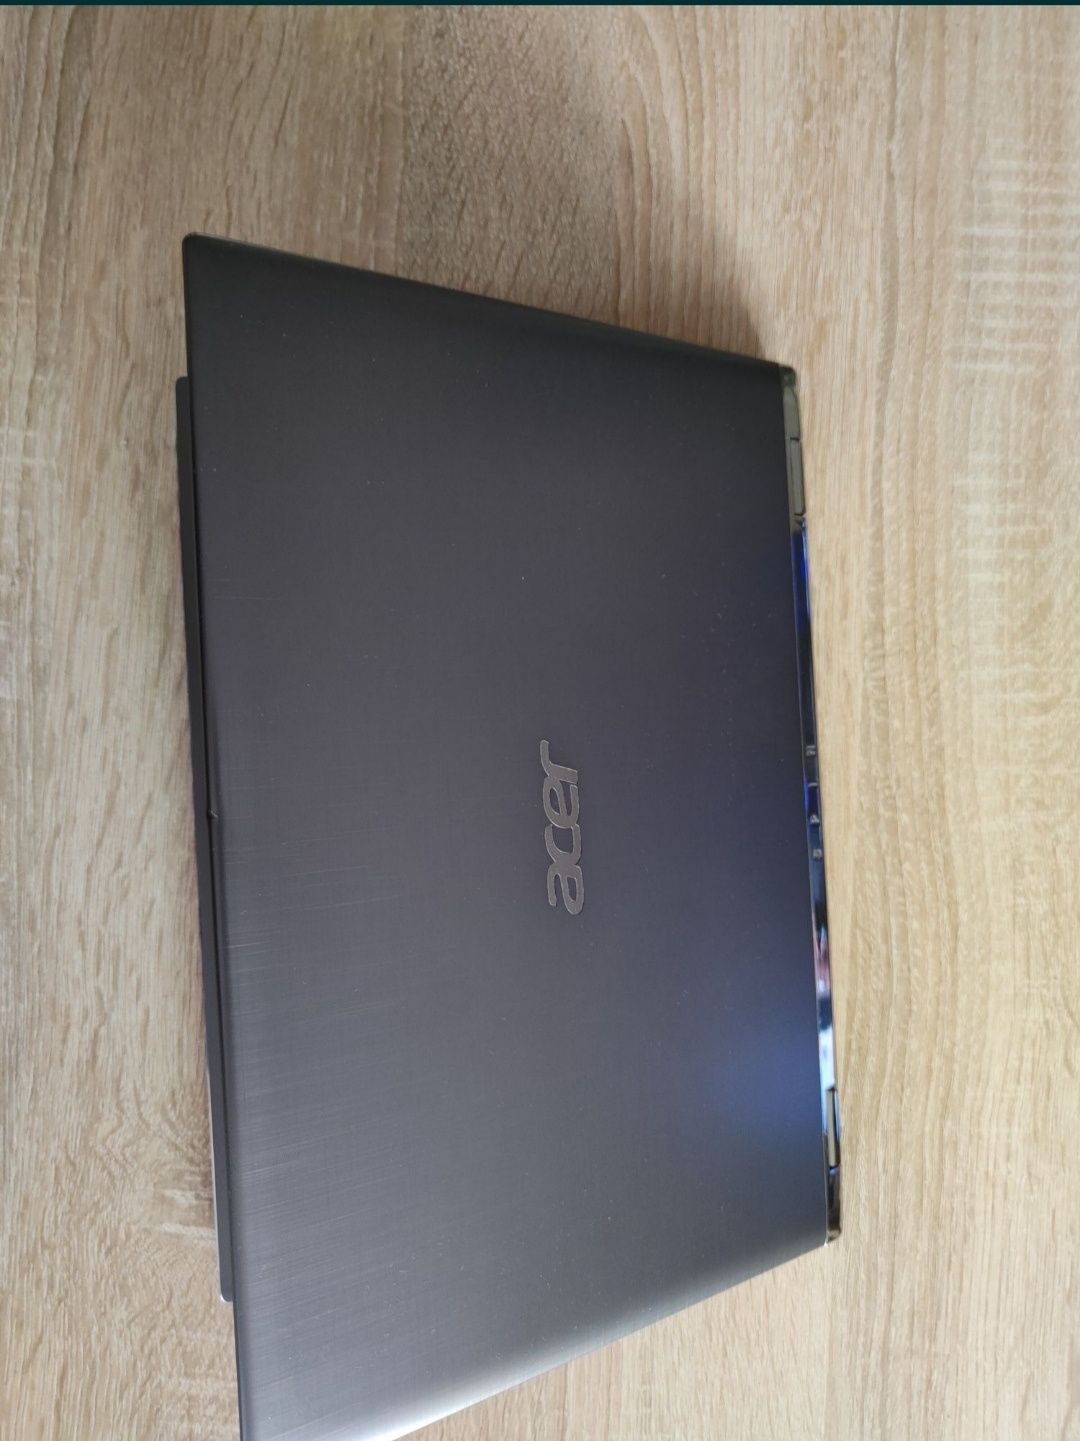 Acer Spin 1 laptop notebook